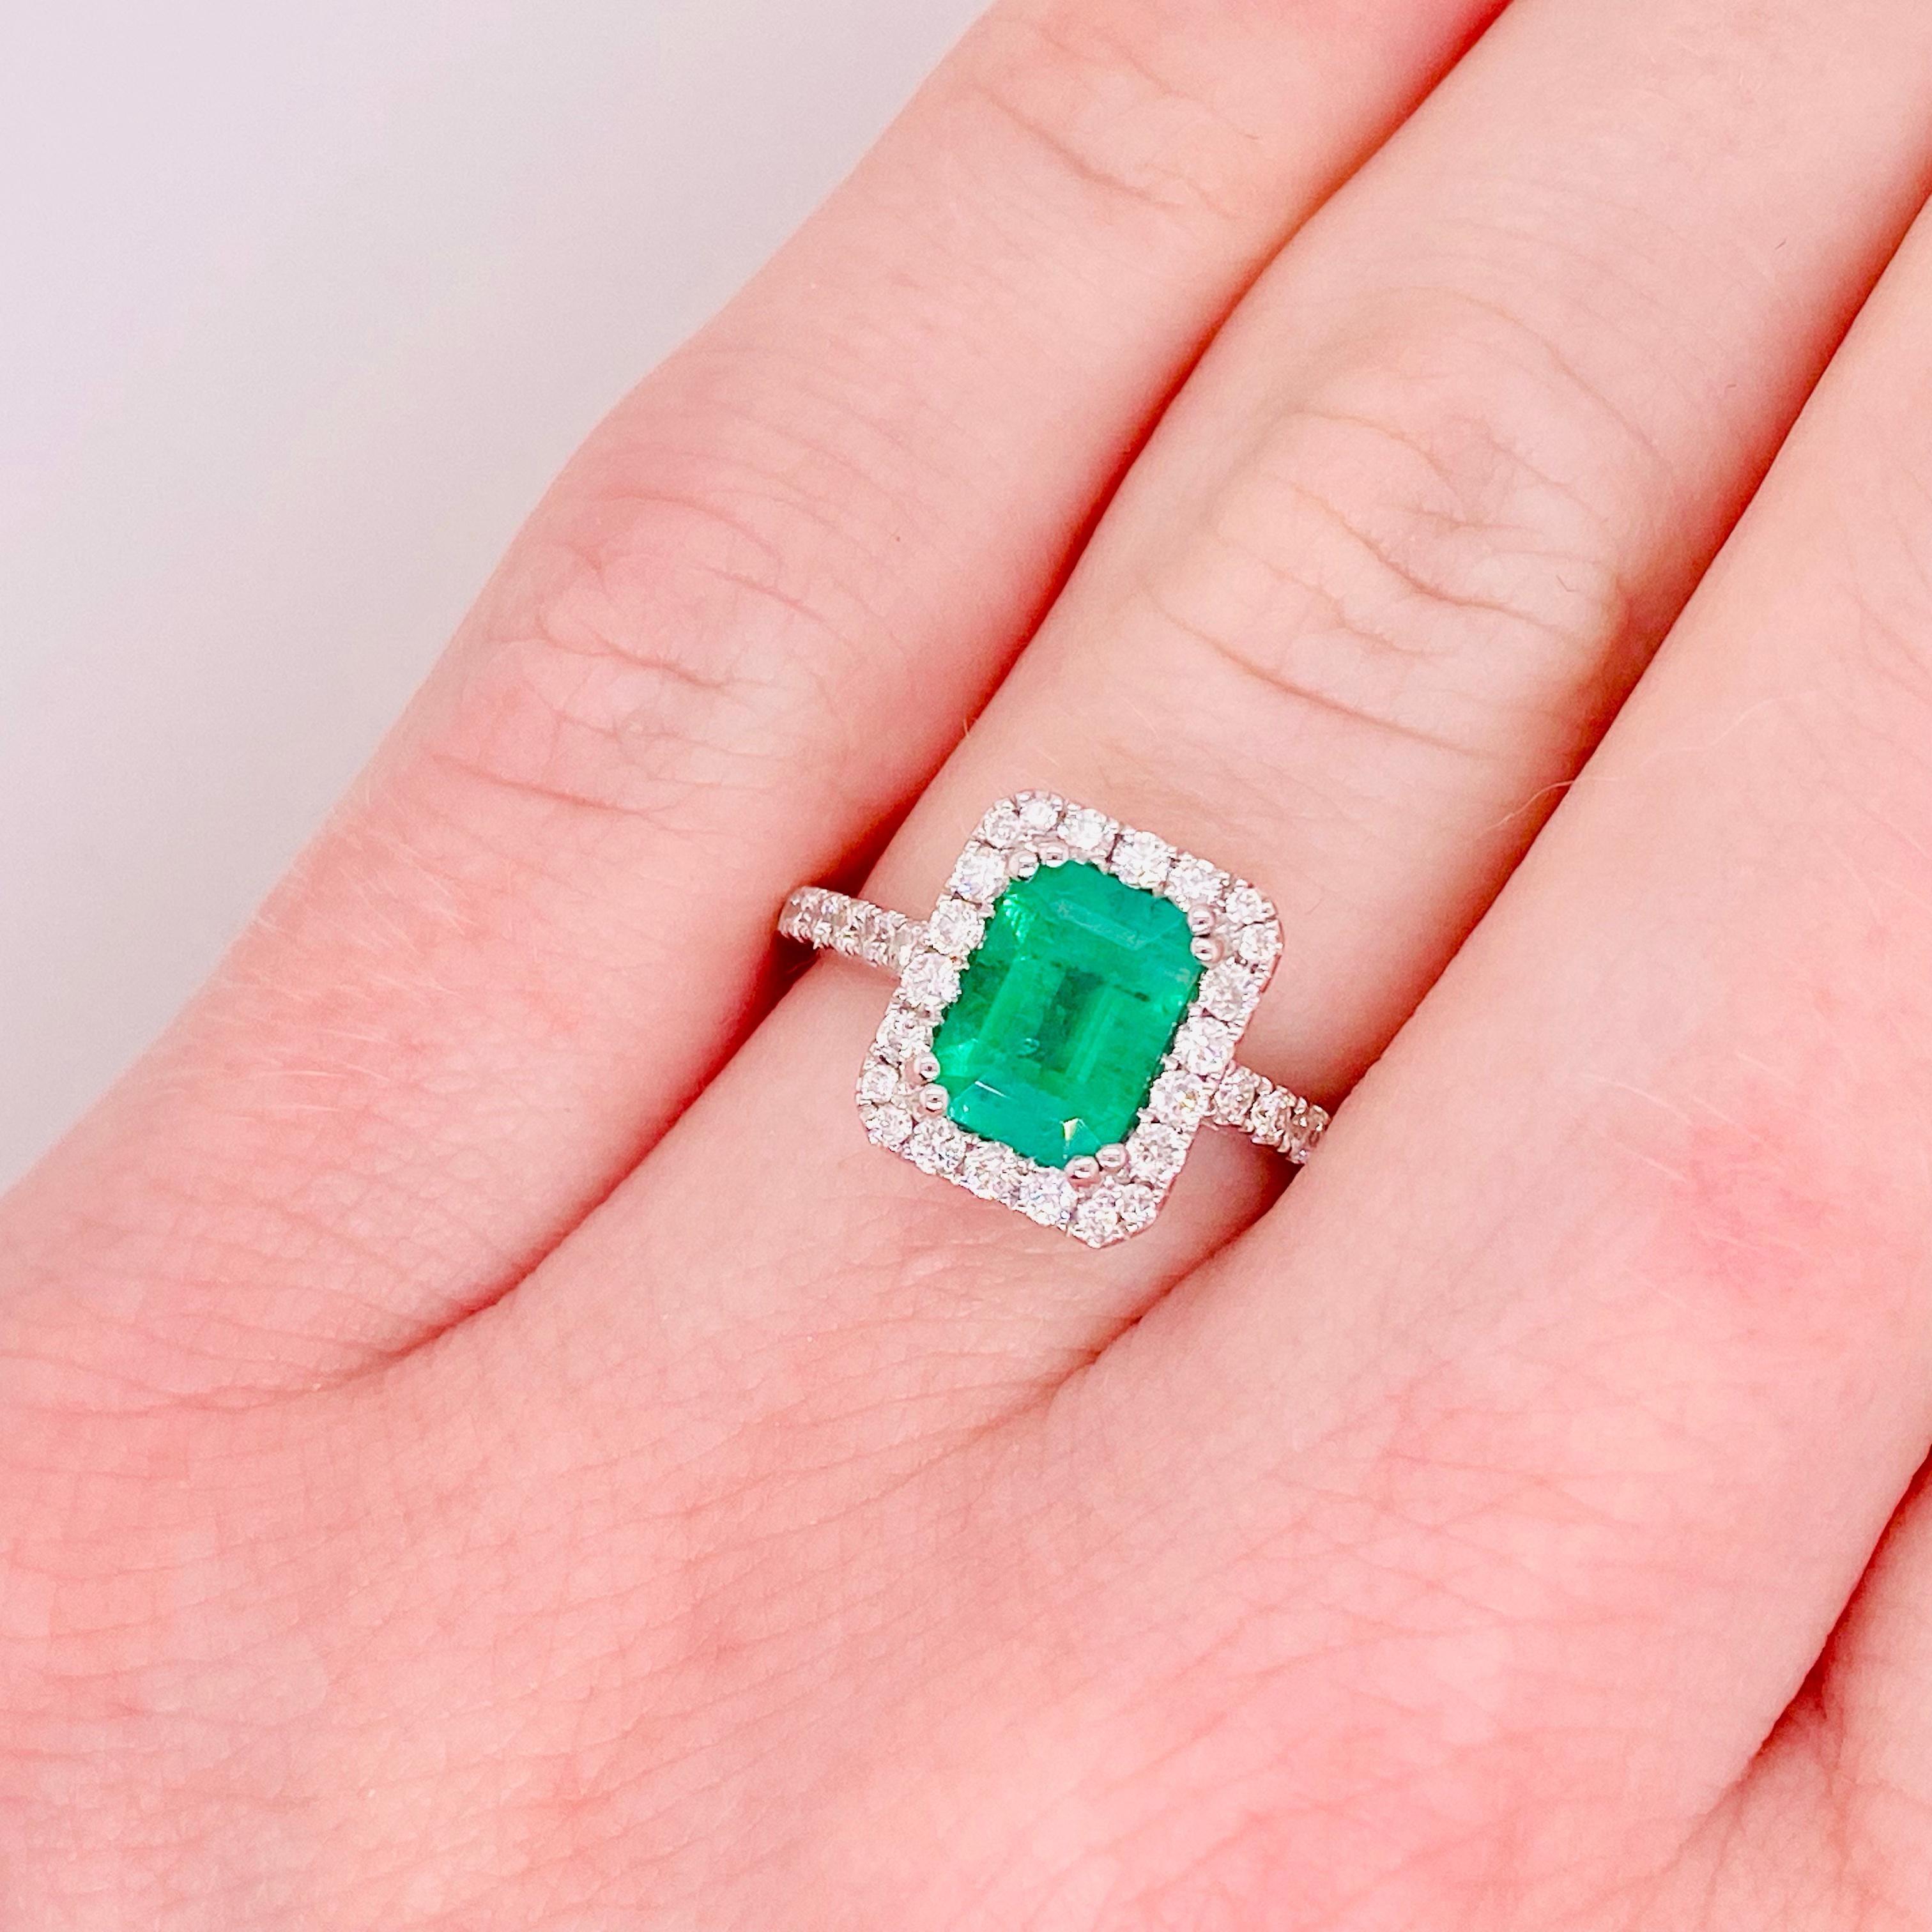 Emerald and Diamond Engagement Ring

The emerald gemstone represents the 